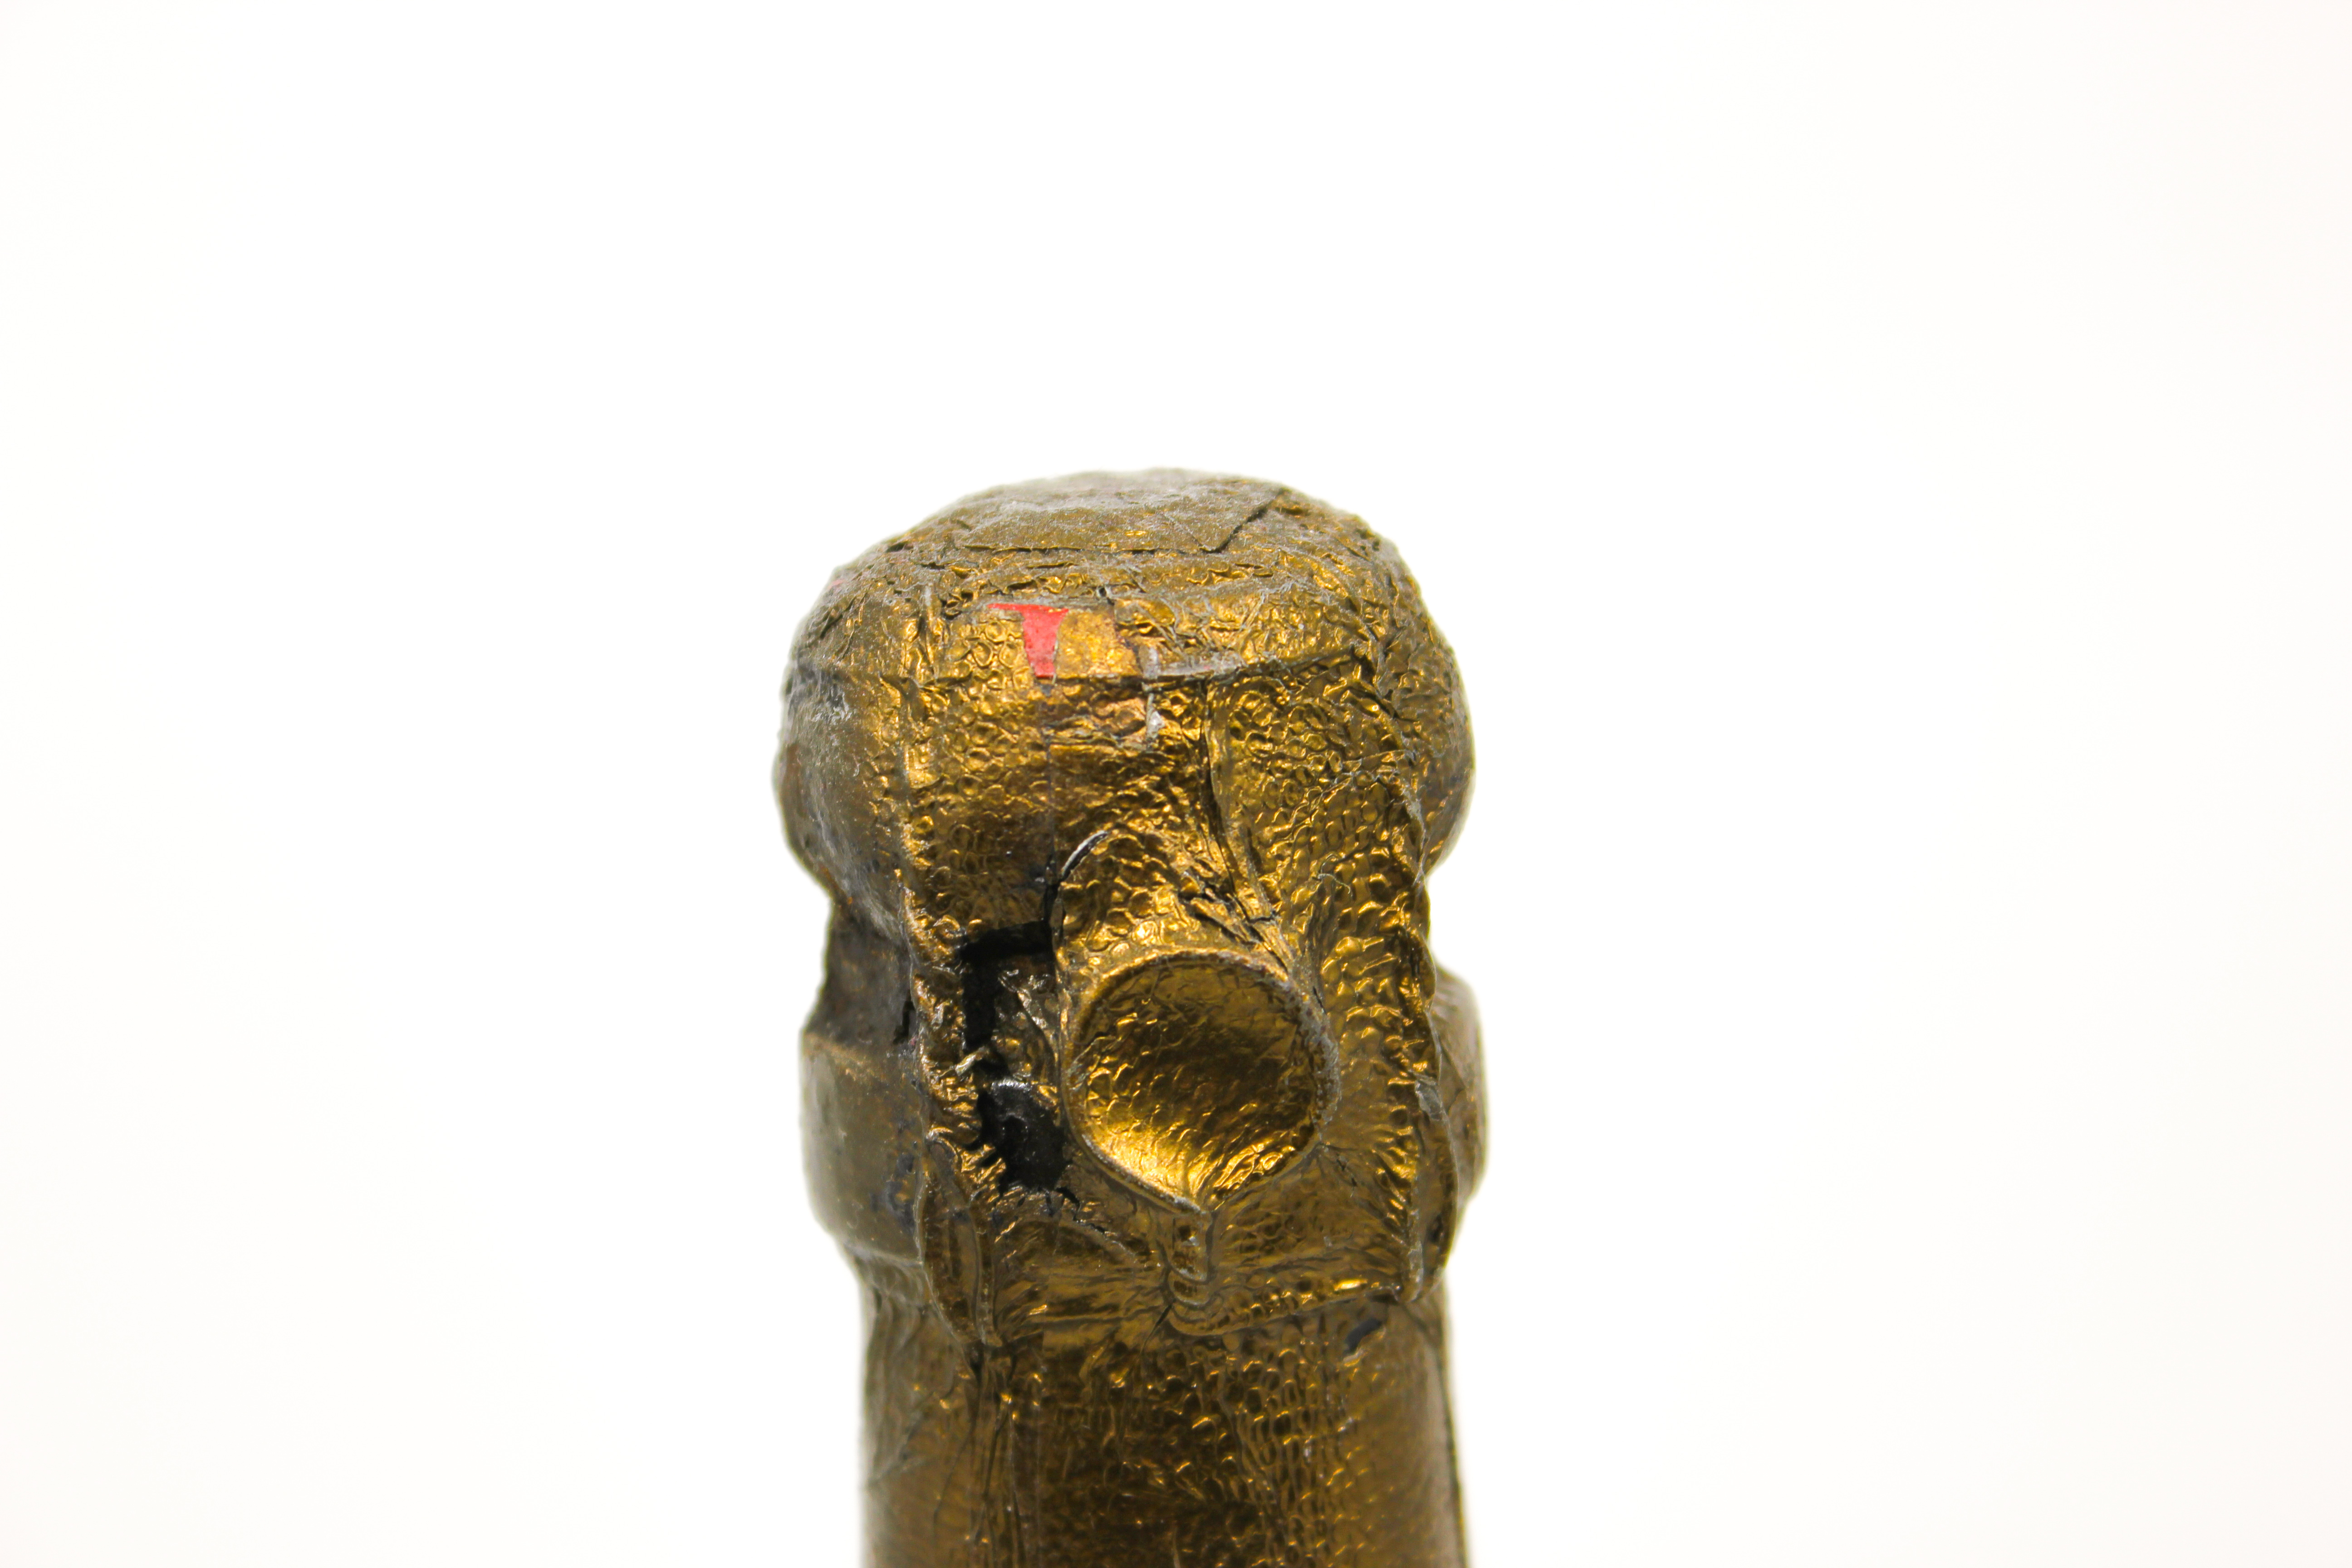 1964 Krug & Co Champagne Private Cuvée - Image 5 of 8